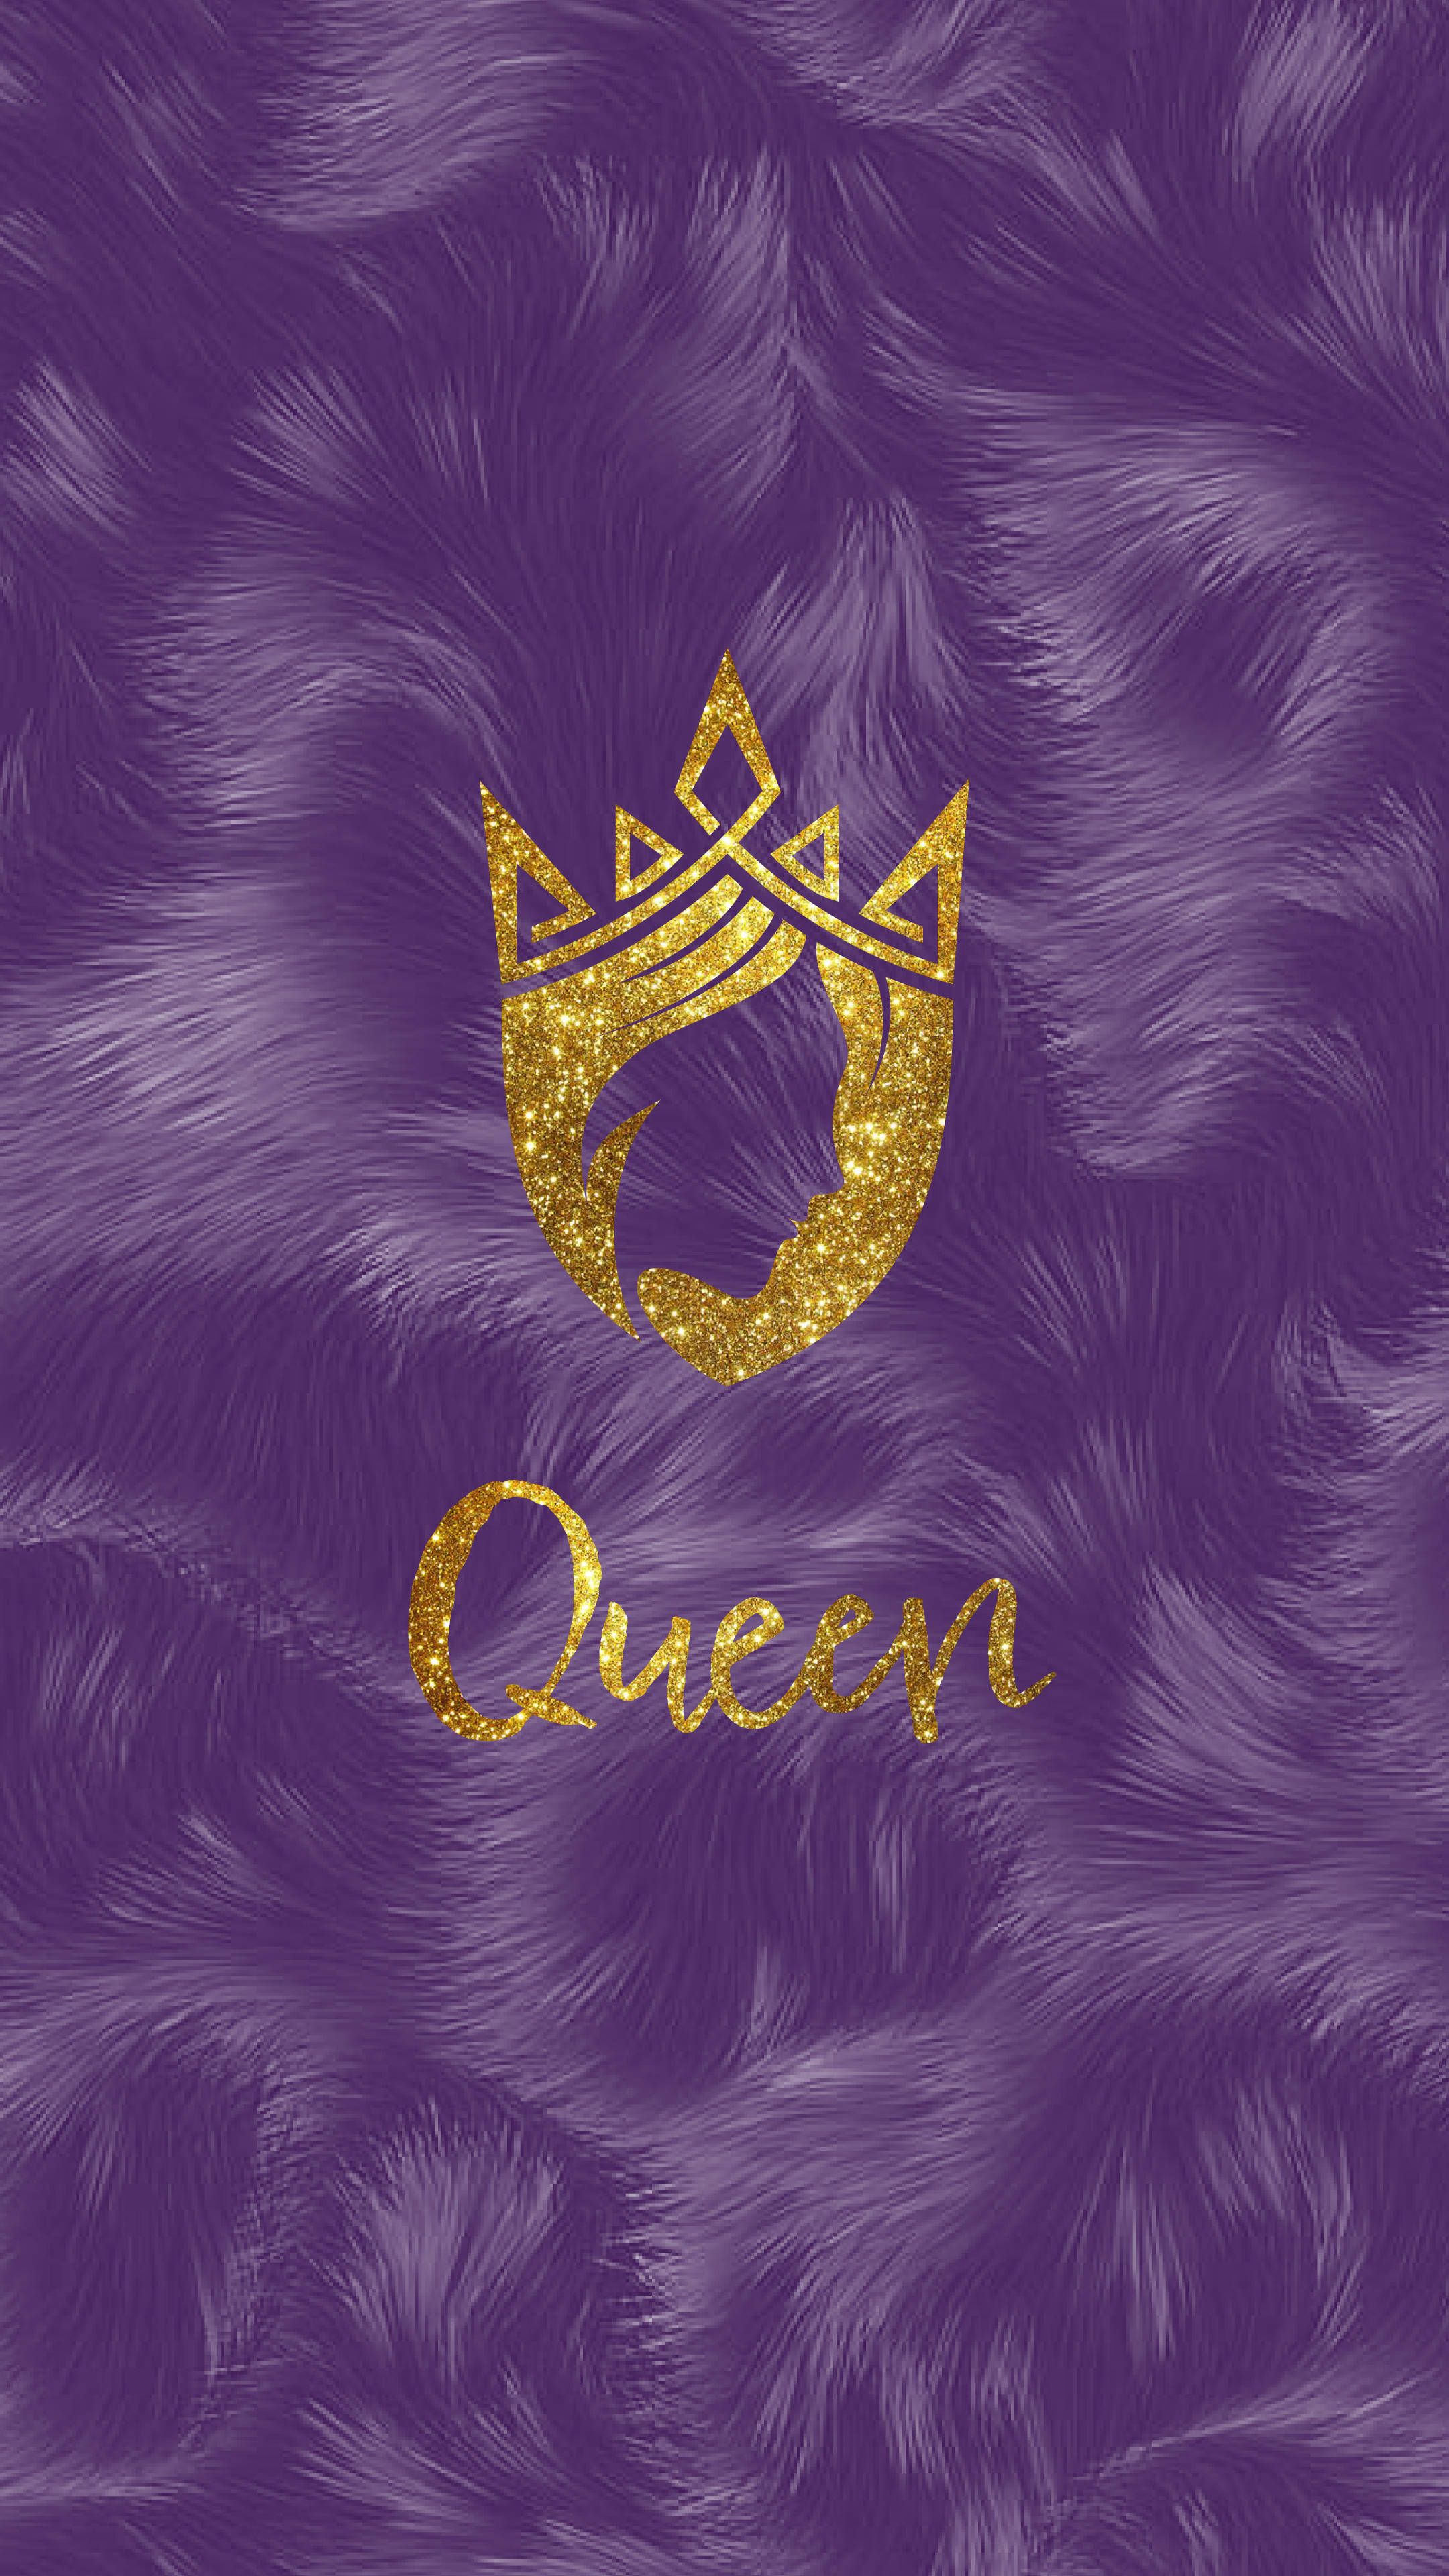 Free Queen Background Photos, [200+] Queen Background for FREE | Wallpapers .com